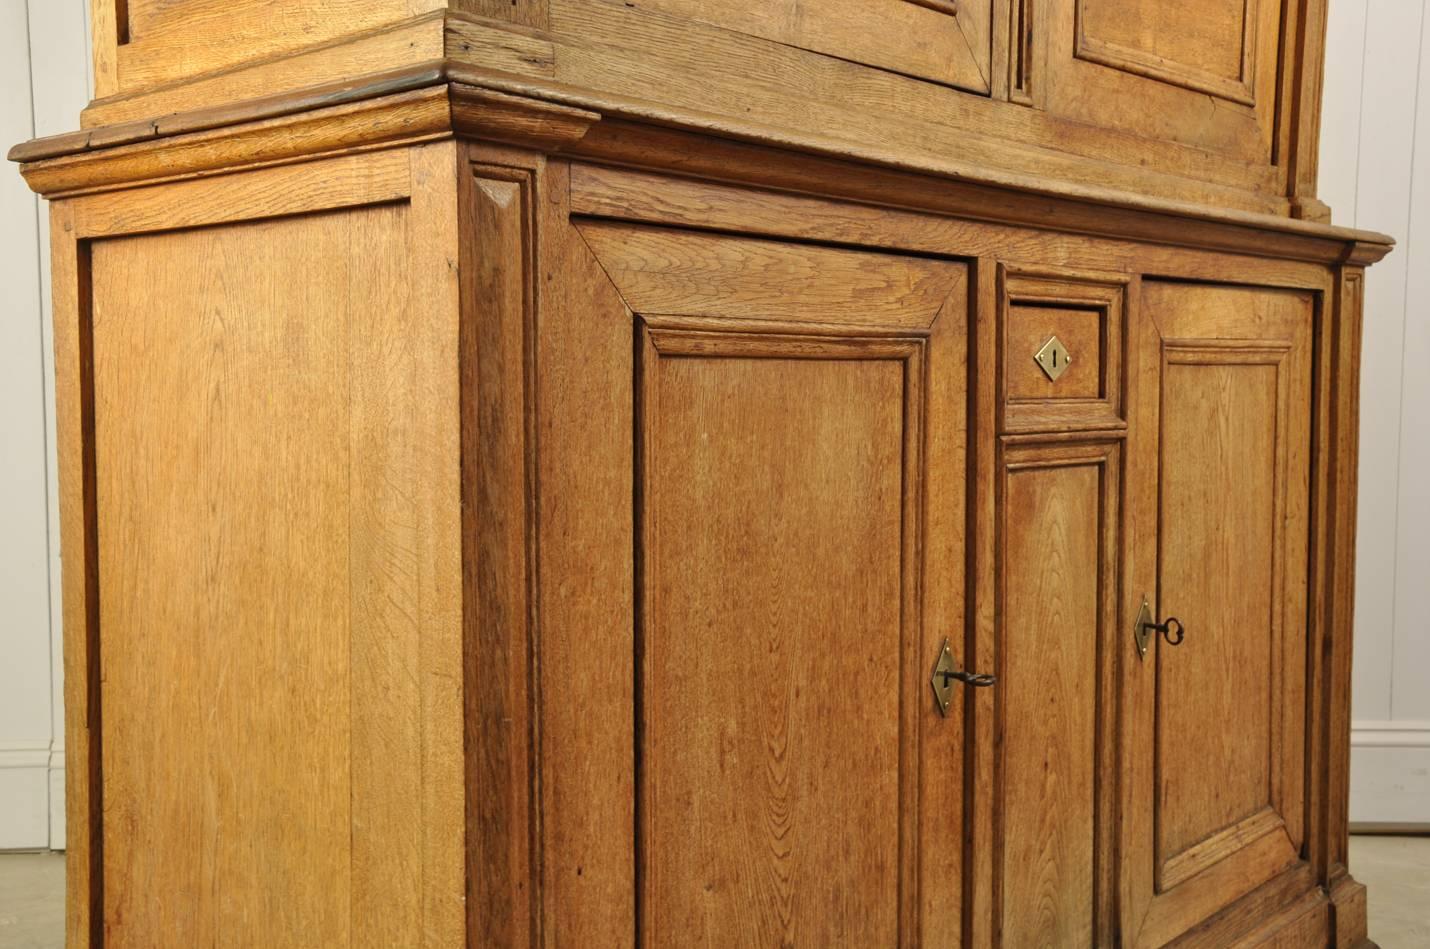 18th Century Antique French Oak Linen Cupboard In Good Condition For Sale In Cirencester, Gloucestershire